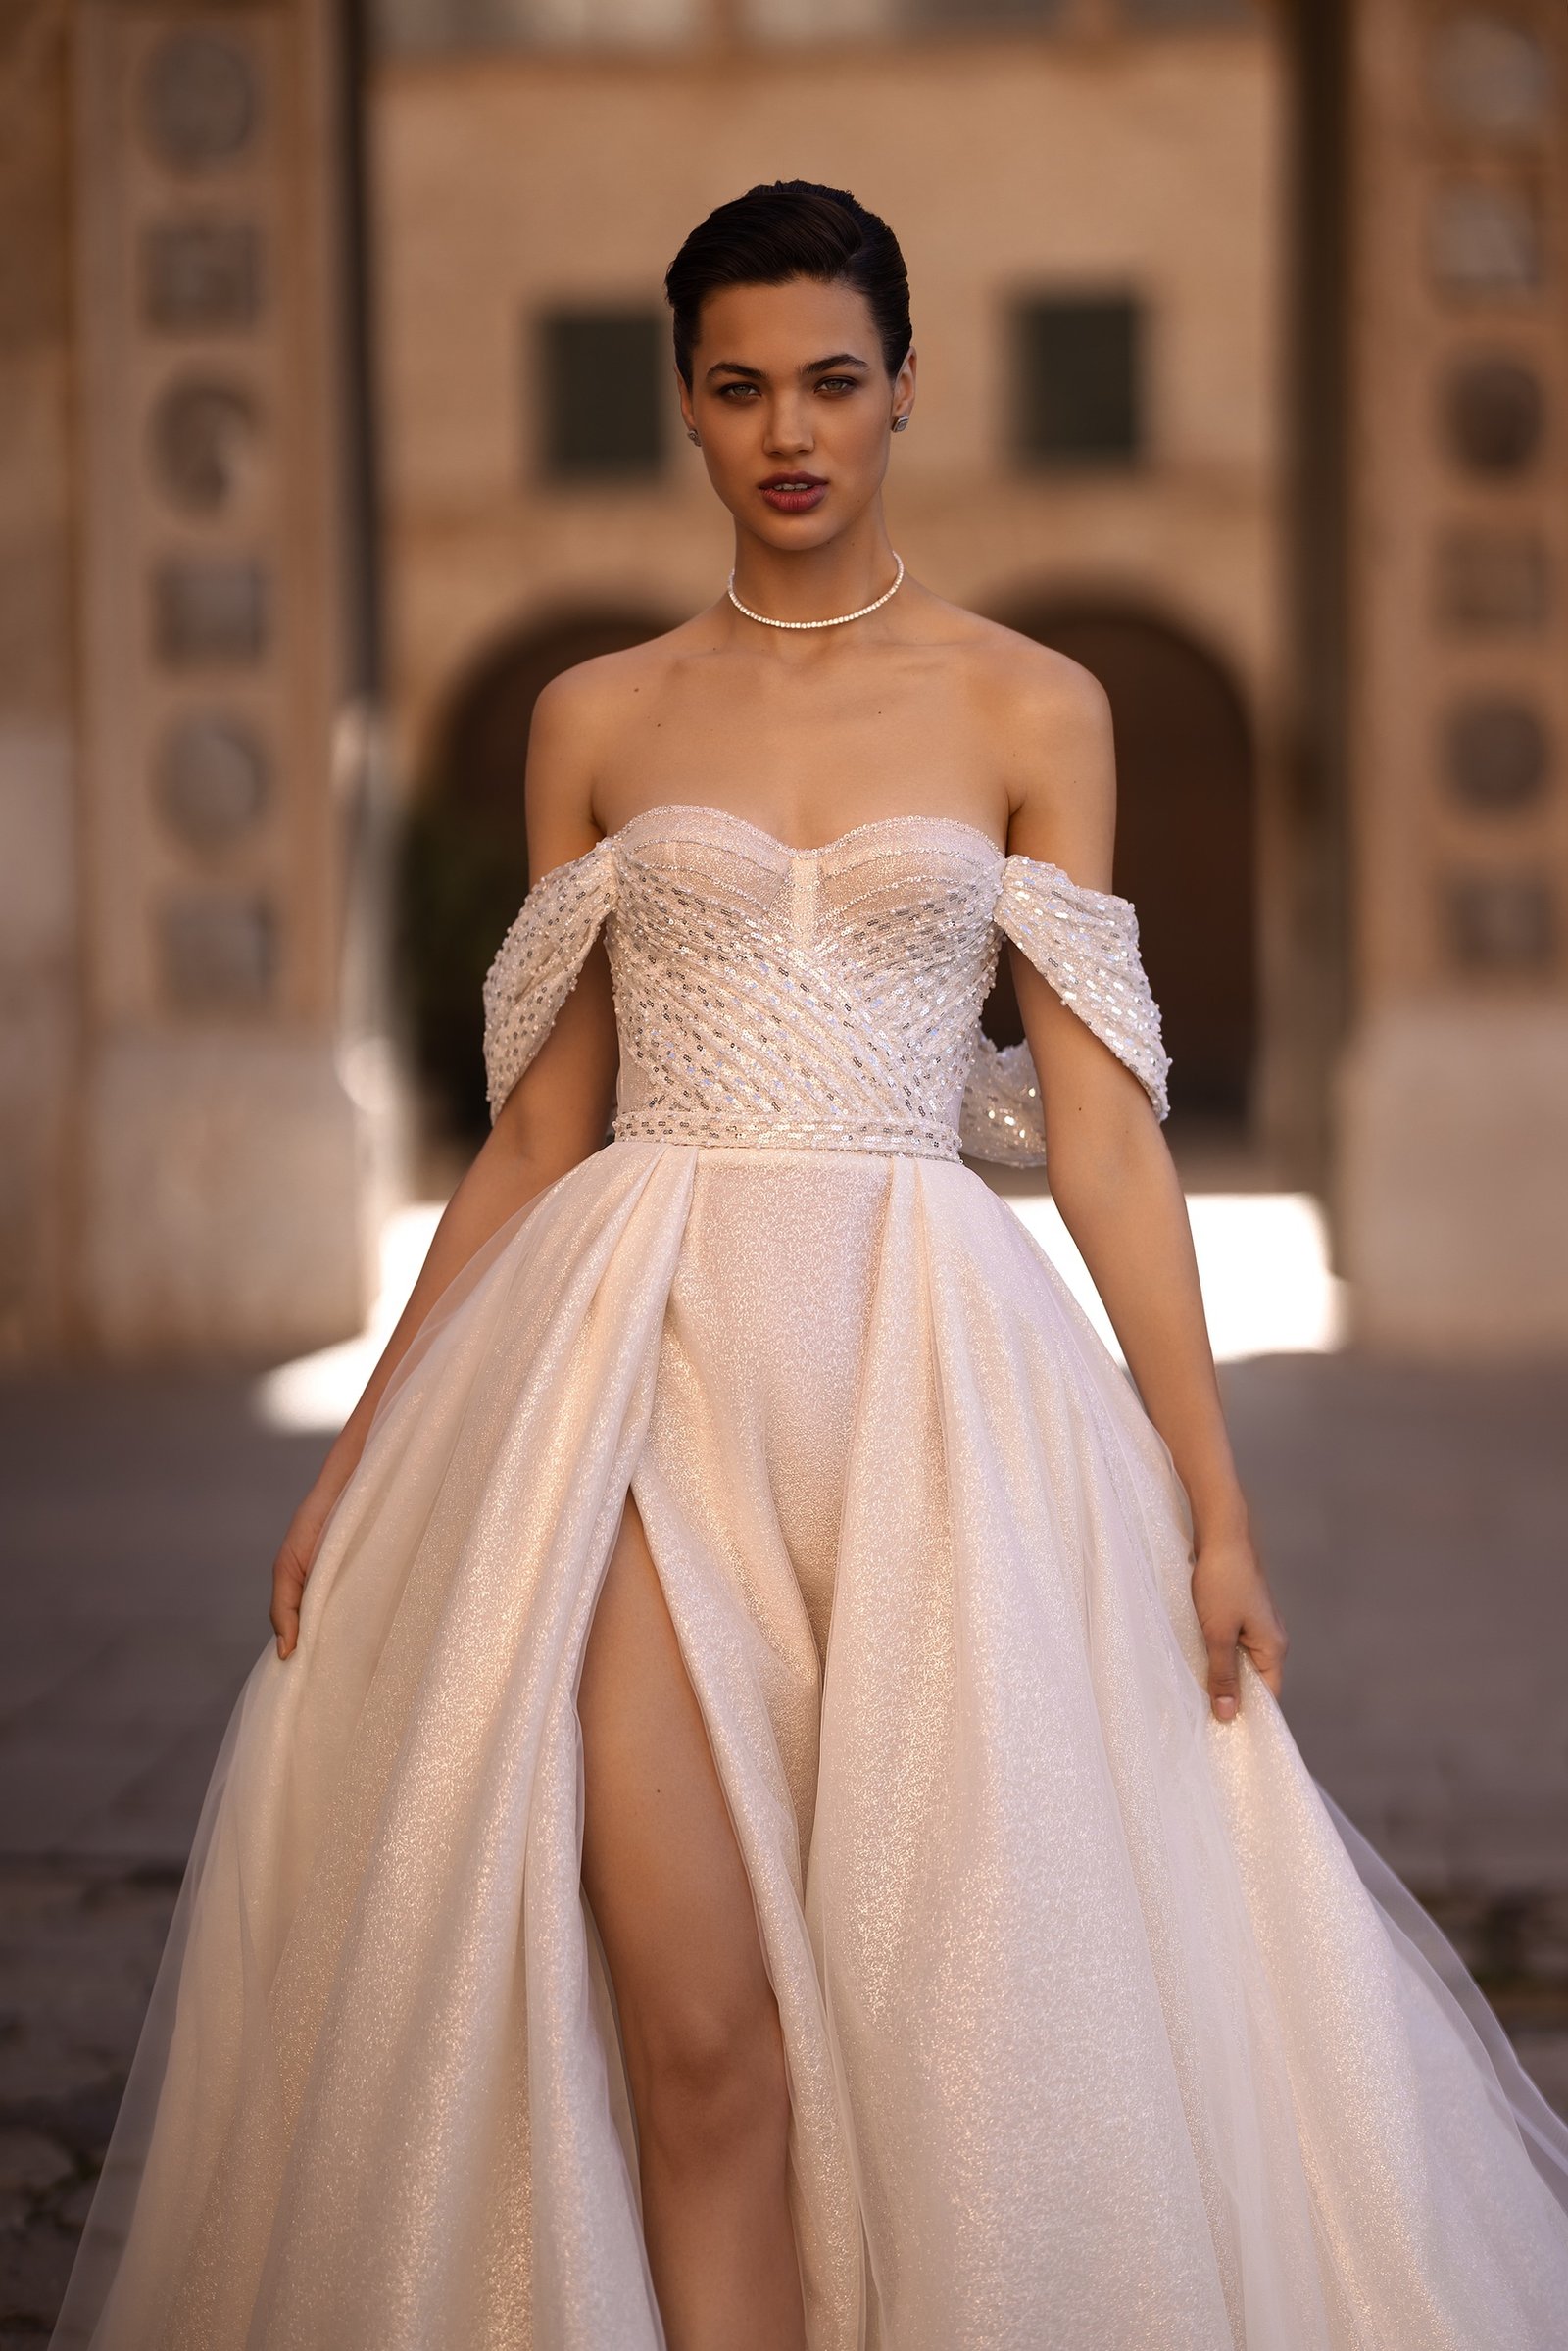 Peony 1 dress by wona concept from alma de oro collection